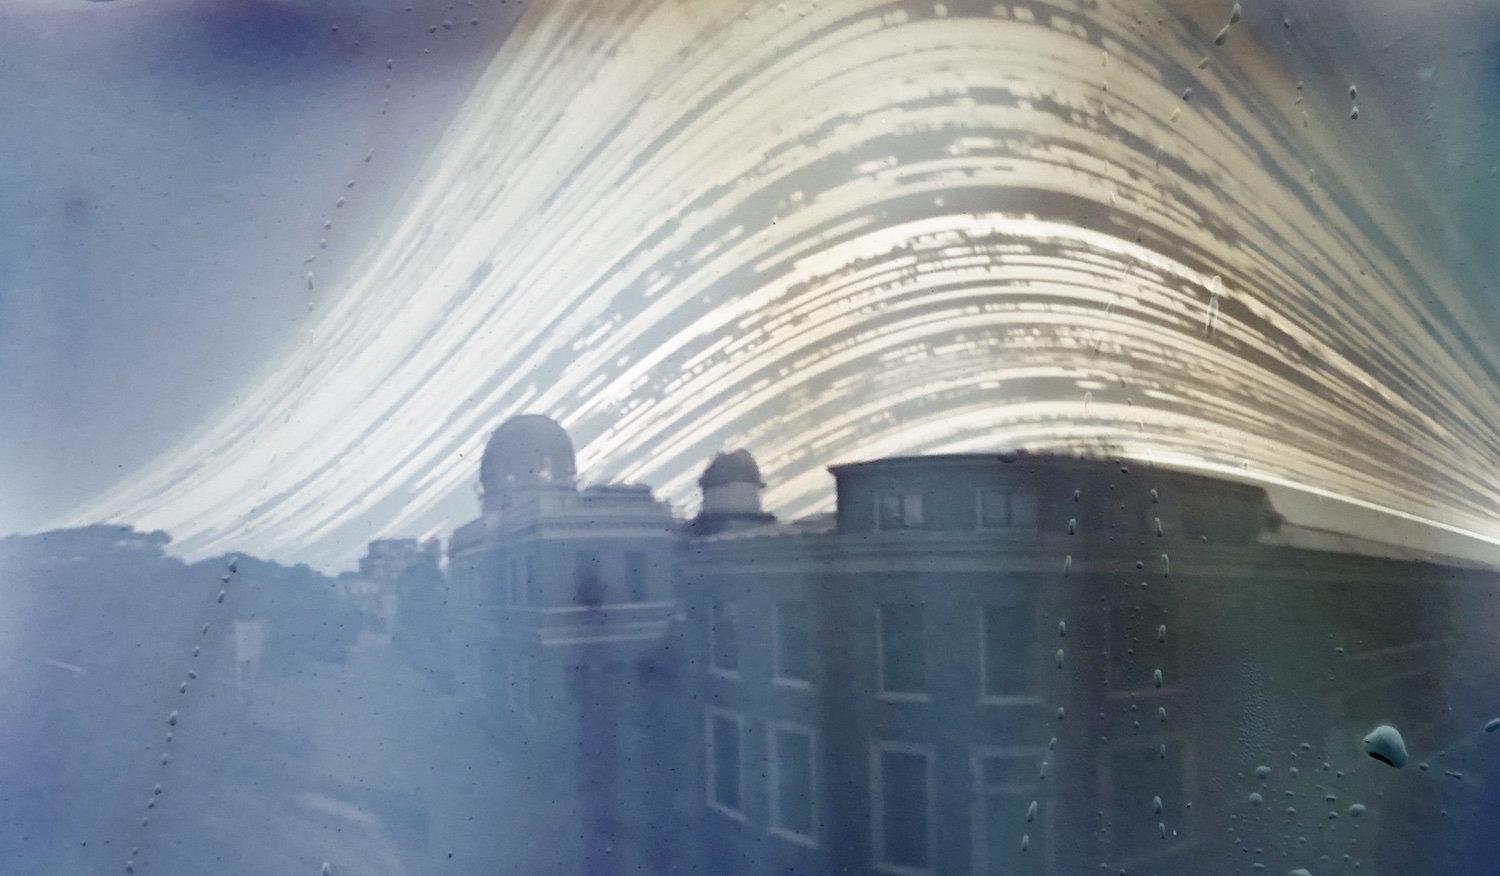 SolarCan pinhole image taken from June 2022 to December 2022 in Leiden, The Netherlands, showing the Old Observatory building and domes with the passage of the Sun behind the buildings.